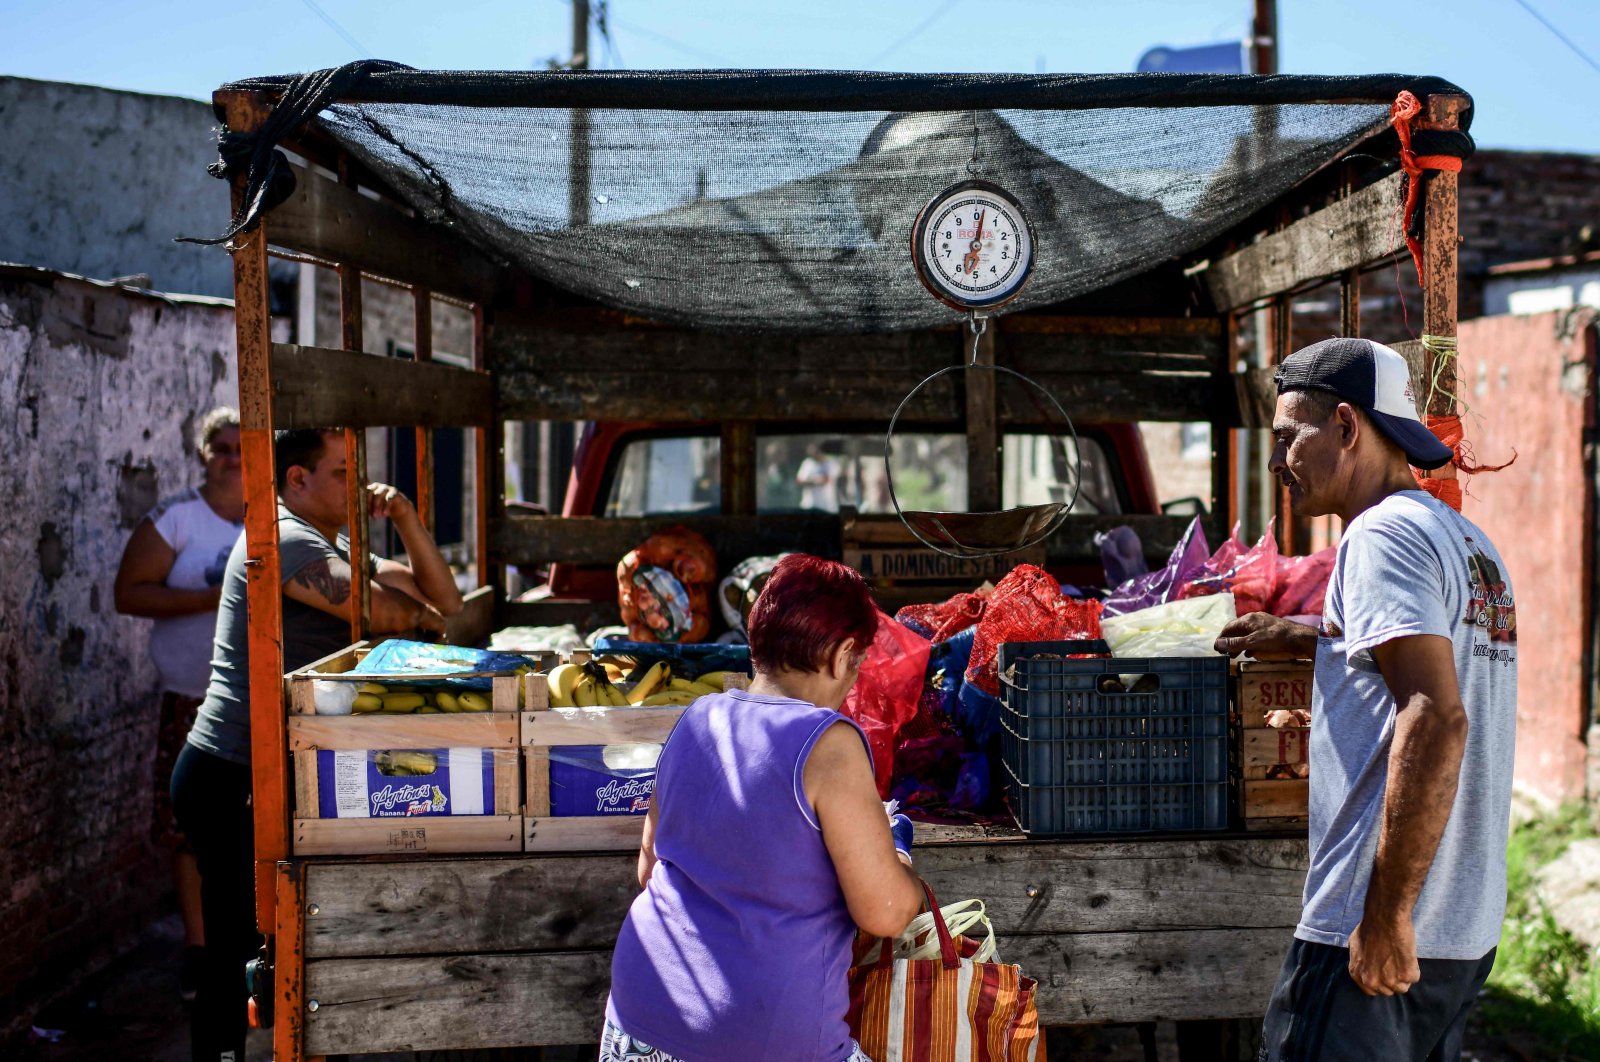 A man sells fruit and vegetables from a truck in the San Petersburgo neighborhood of La Matanza municipality, Buenos Aires, Argentina, April 12, 2021. (AFP Photo)